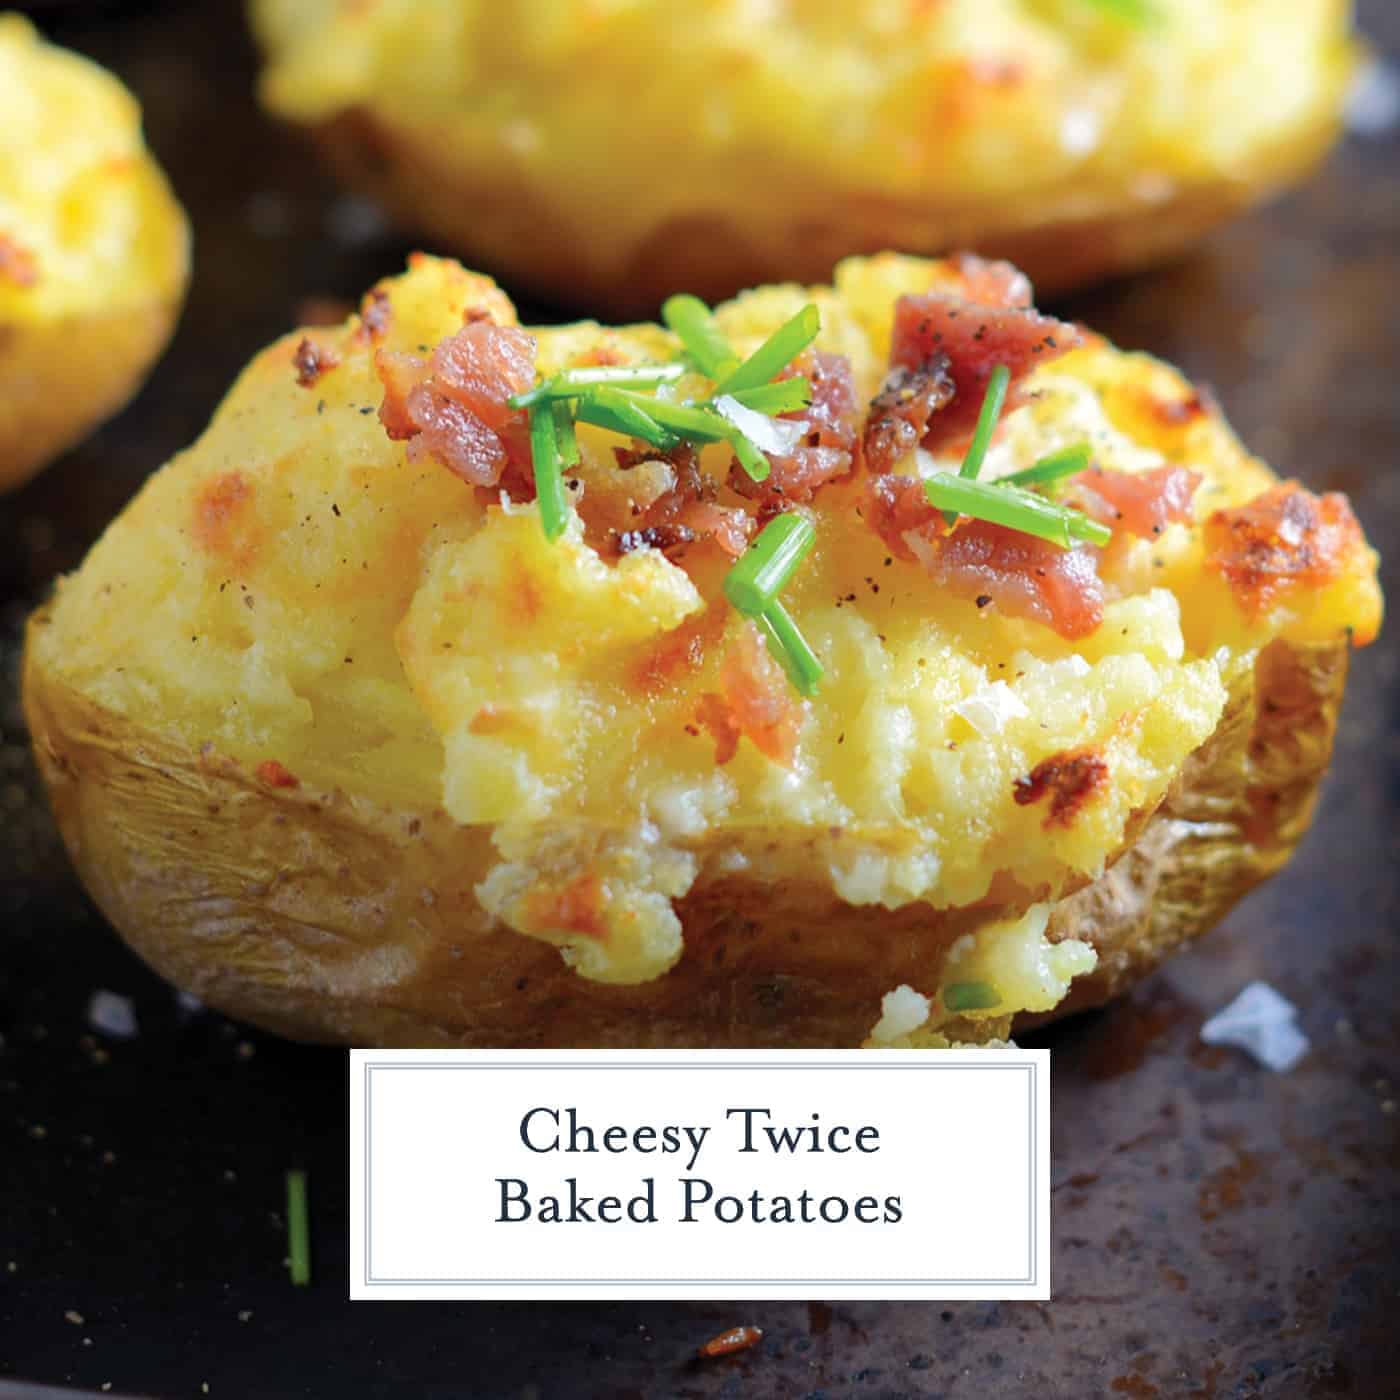 Cheesy Twice Baked Potatoes are velvety, buttery and cheesy- the perfect trifecta of potato perfection and the ultimate potato side dish! #potatosidedishes #twicebakedpotatoes #cheesypotatoes www.savoryexperiments.com 